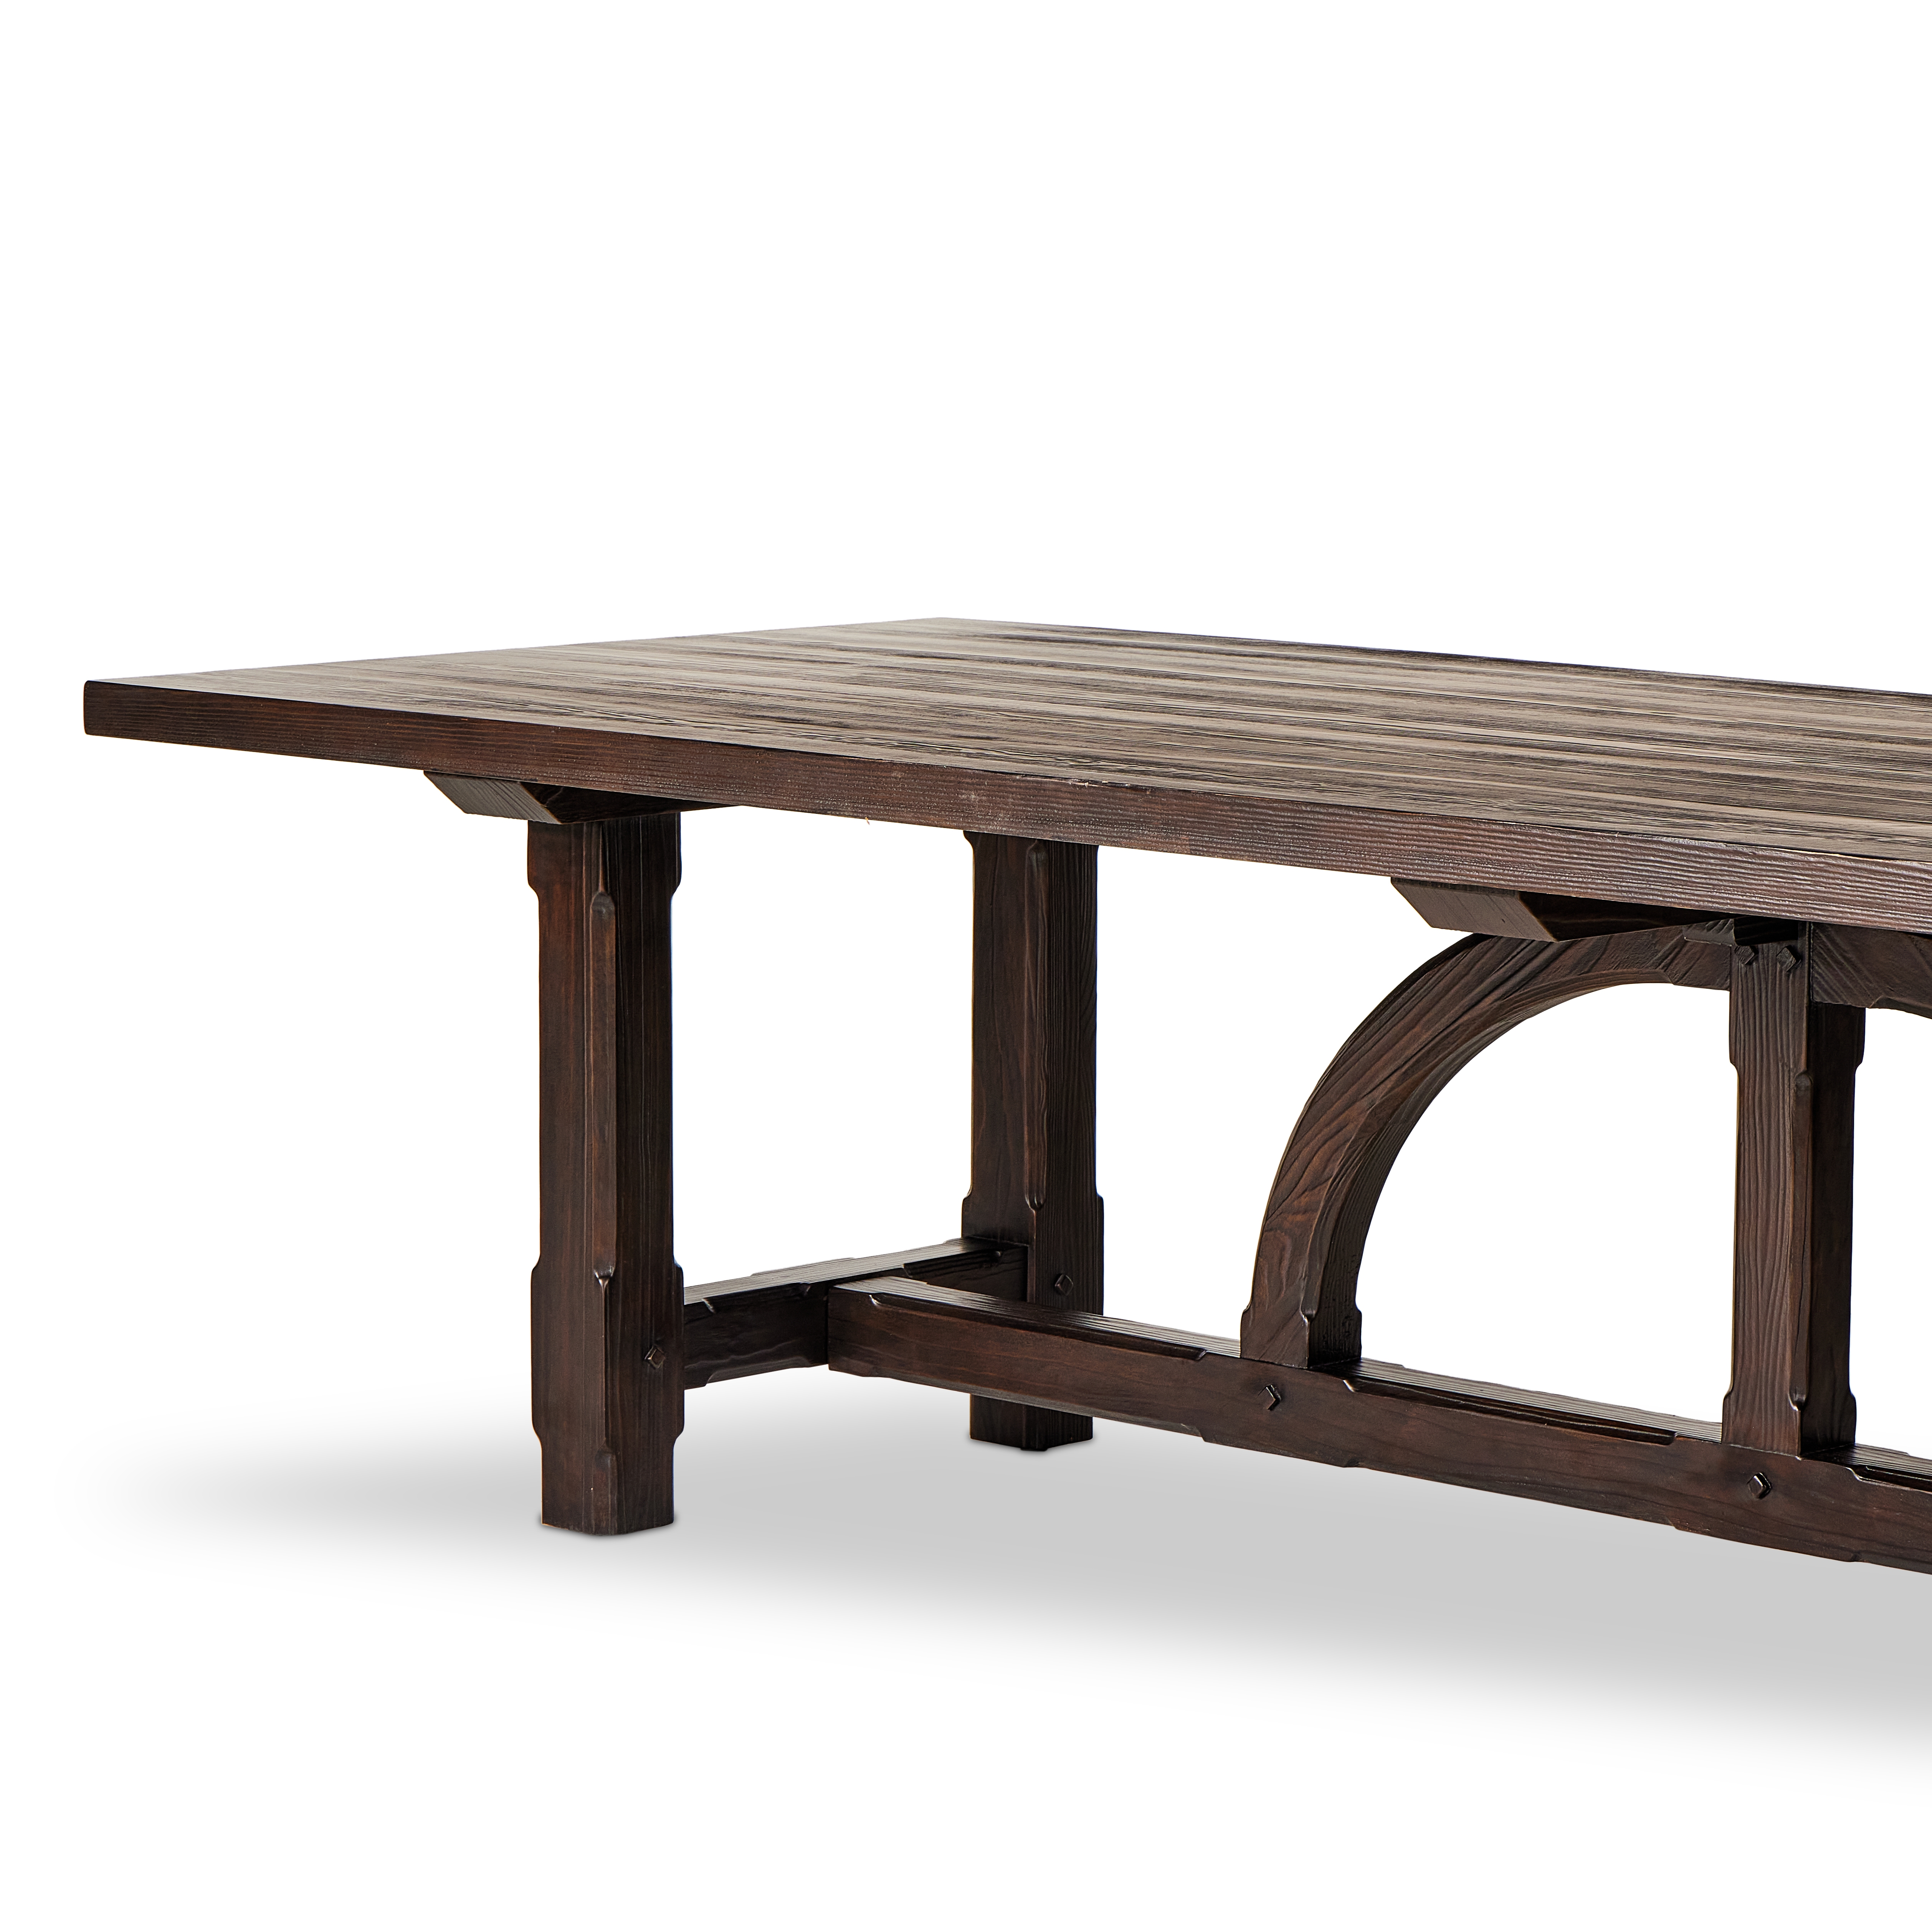 The Arch Dining Table-Medium Brown Fir - Image 1